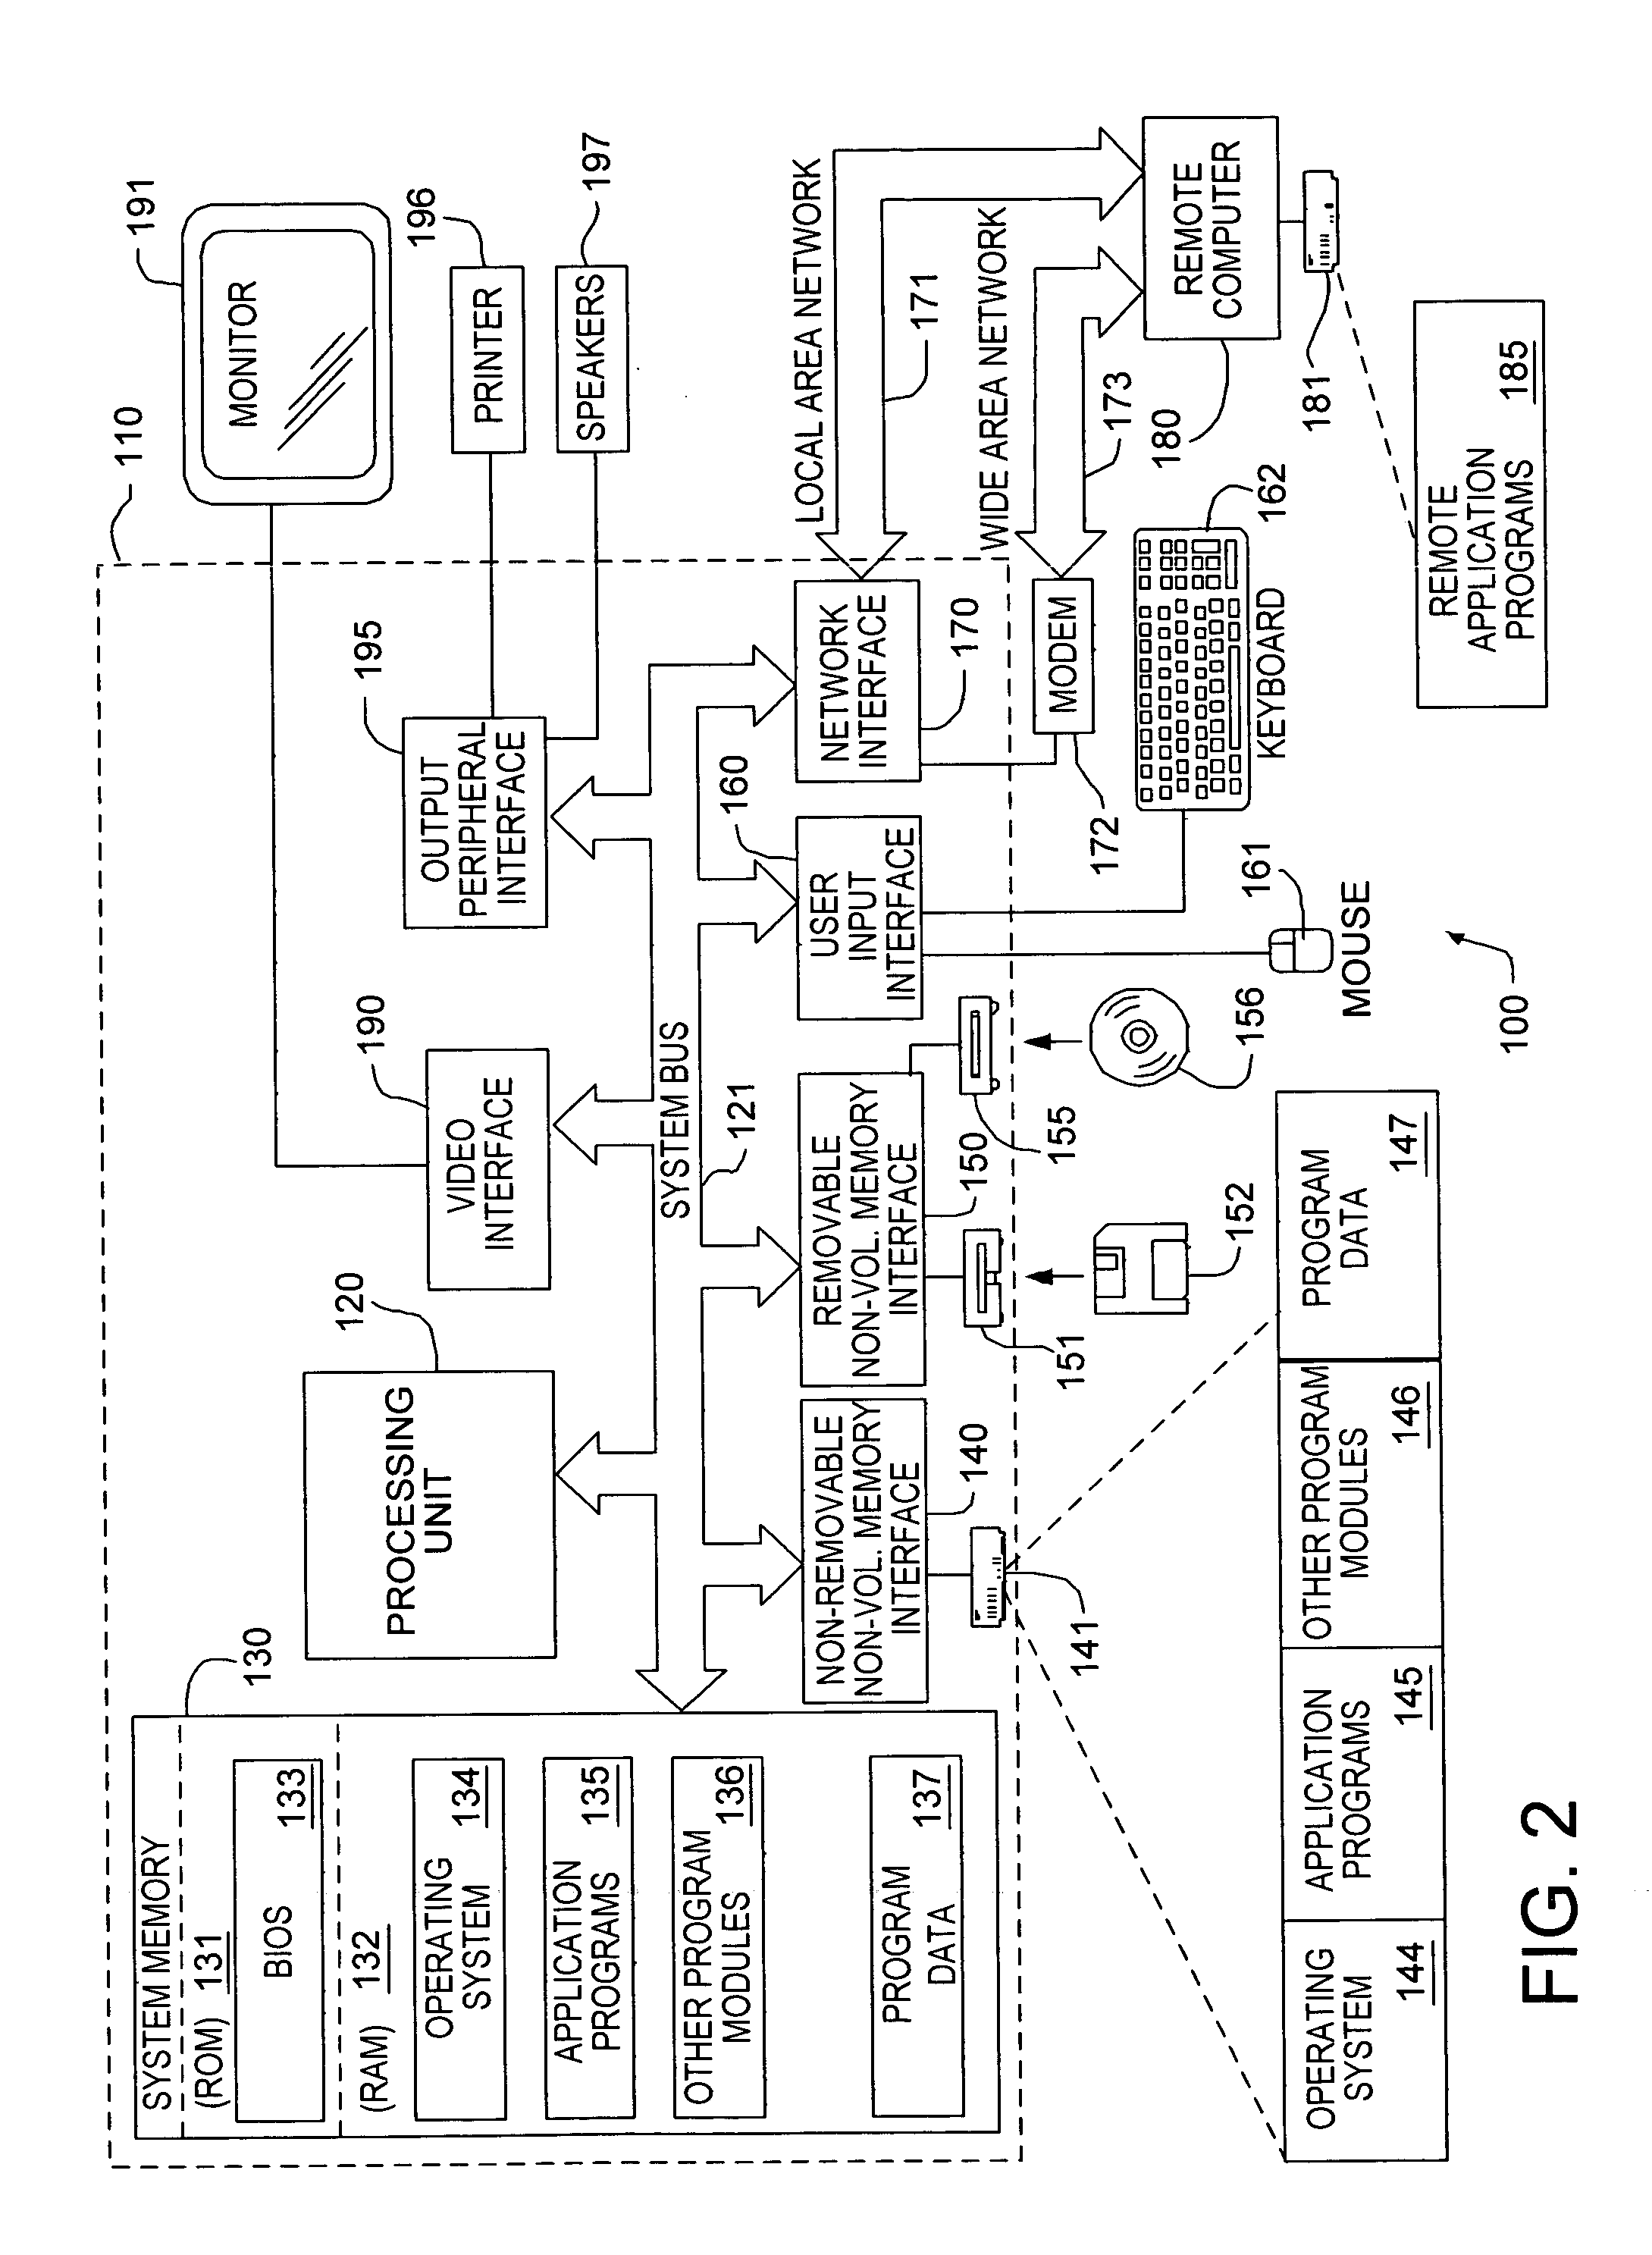 System and method for deriving and visualizing business intelligence data